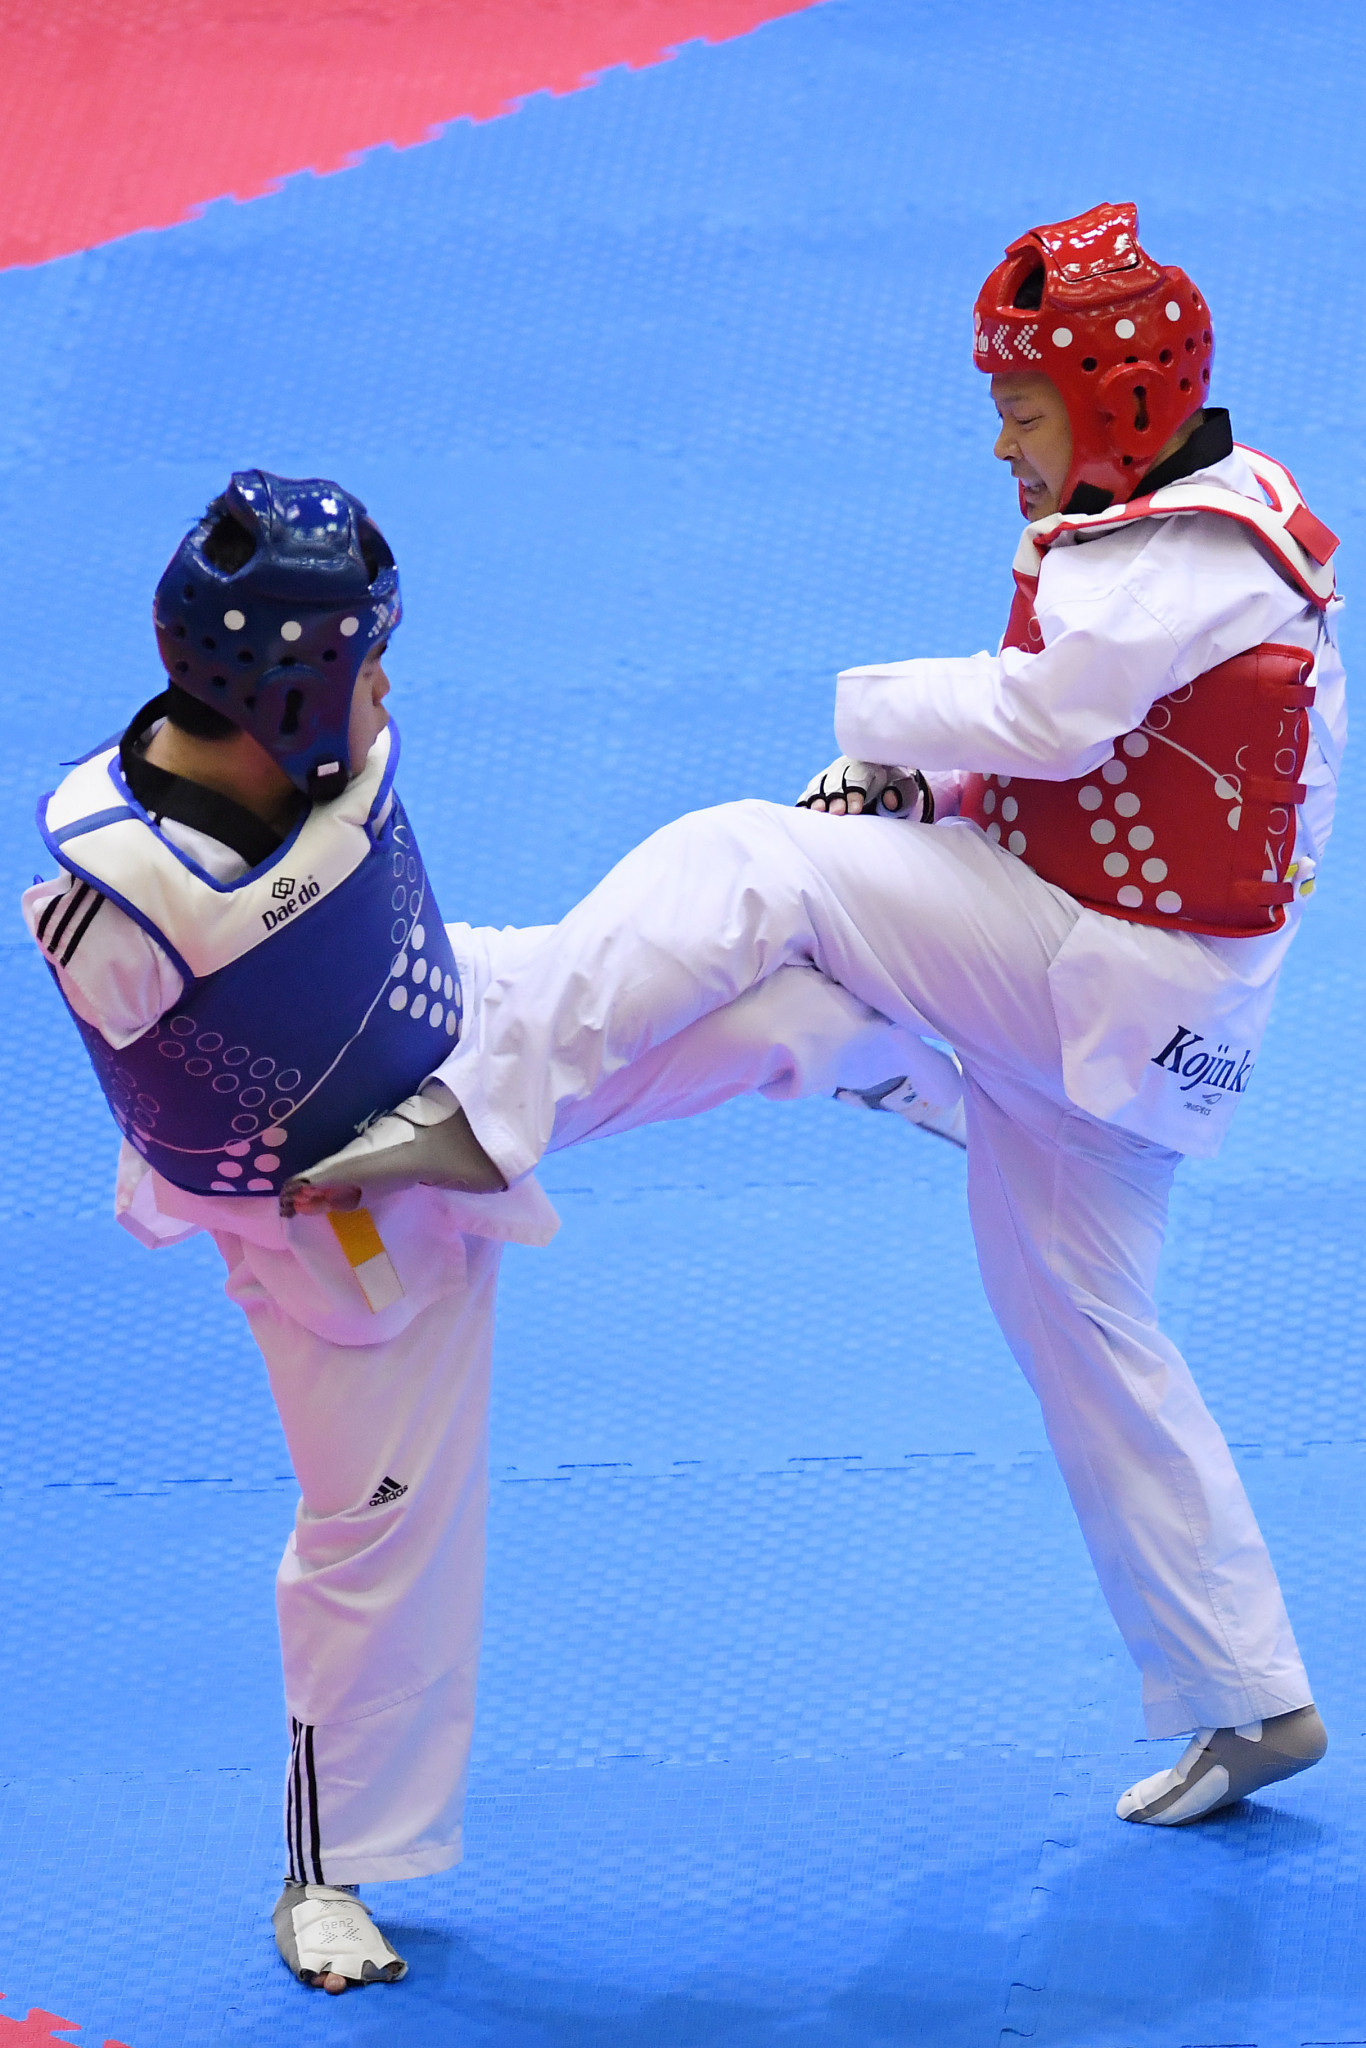 Taekwondo is due to make its Paralympic debut at Tokyo 2020 next year ©Getty Images